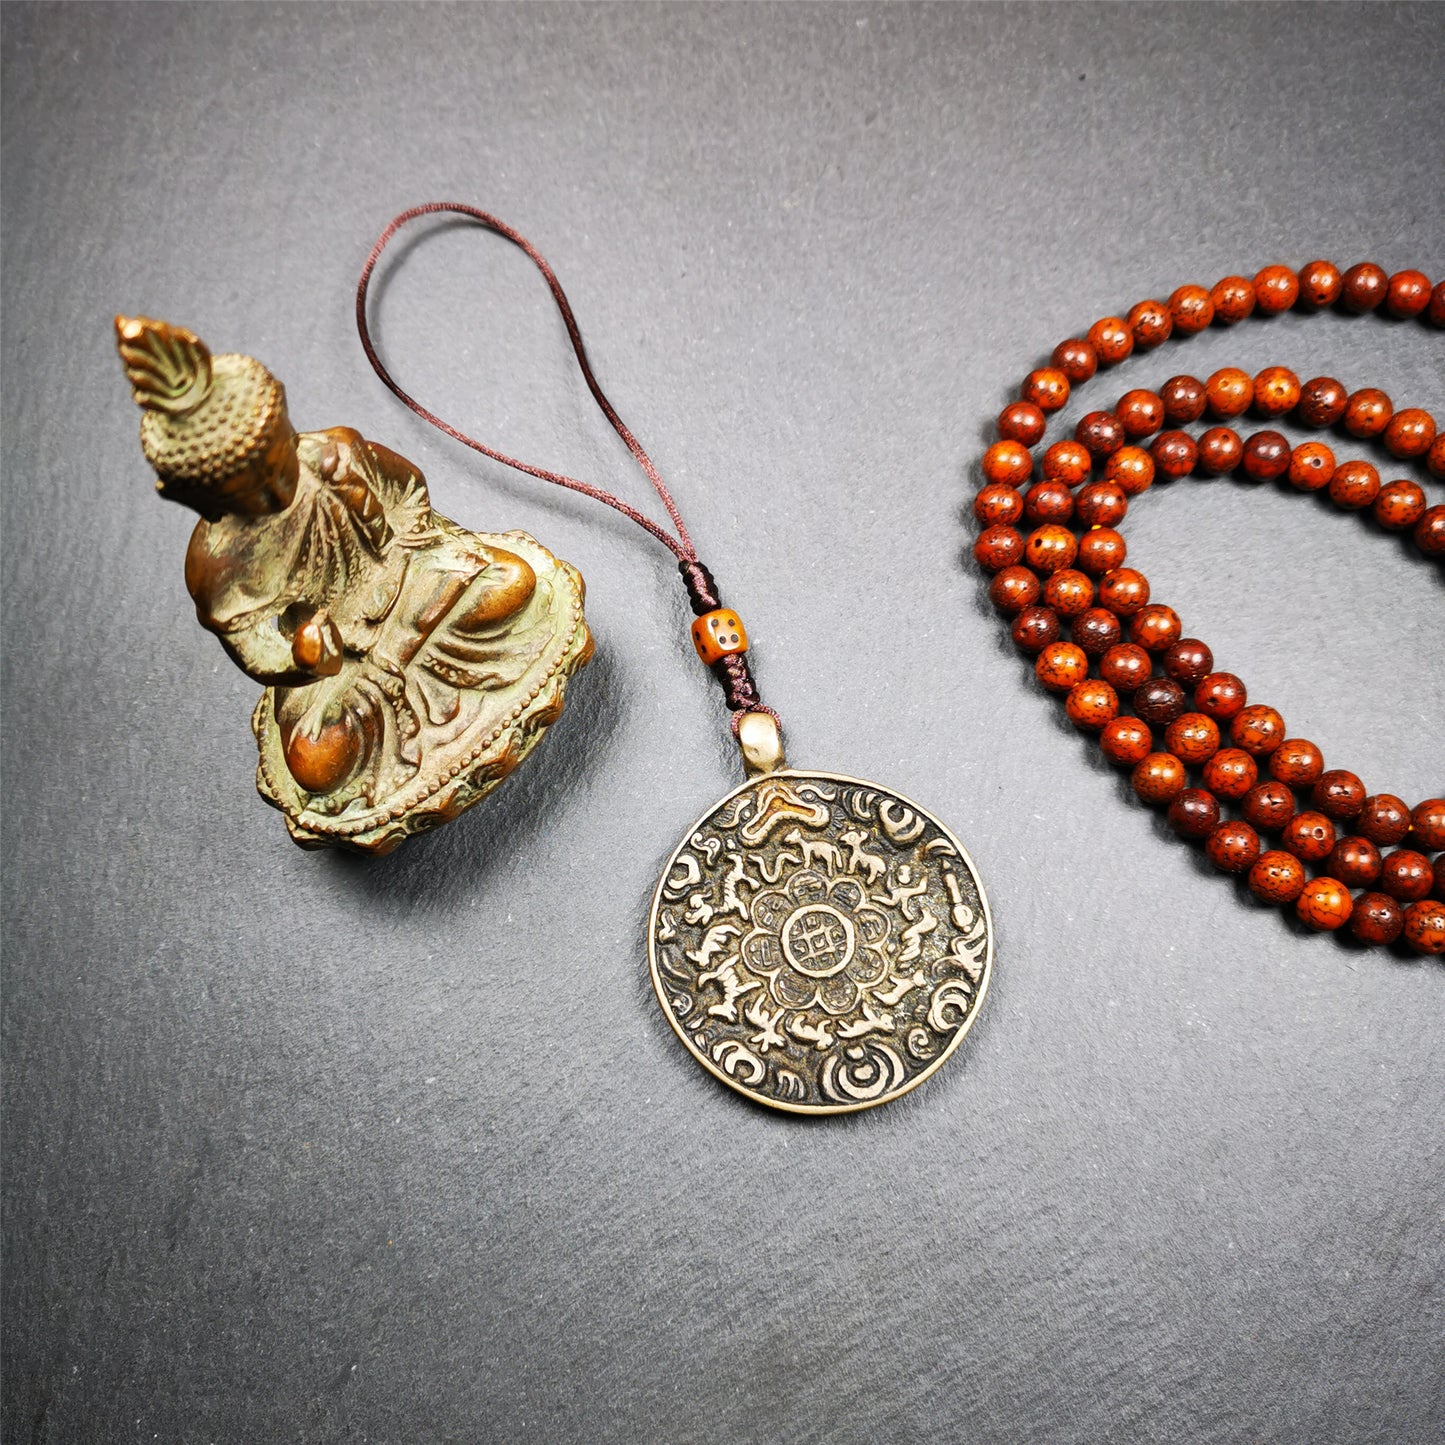 This unique tibetan calendar melong badge was collected from Kathok Monastery,about 50 years old. It's a Astrology Protective Amulet Pendant,made of thokcha,the pattern is Tibetan Budhist Protective Amulet Pendant - SIPAHO(srid pa ho).